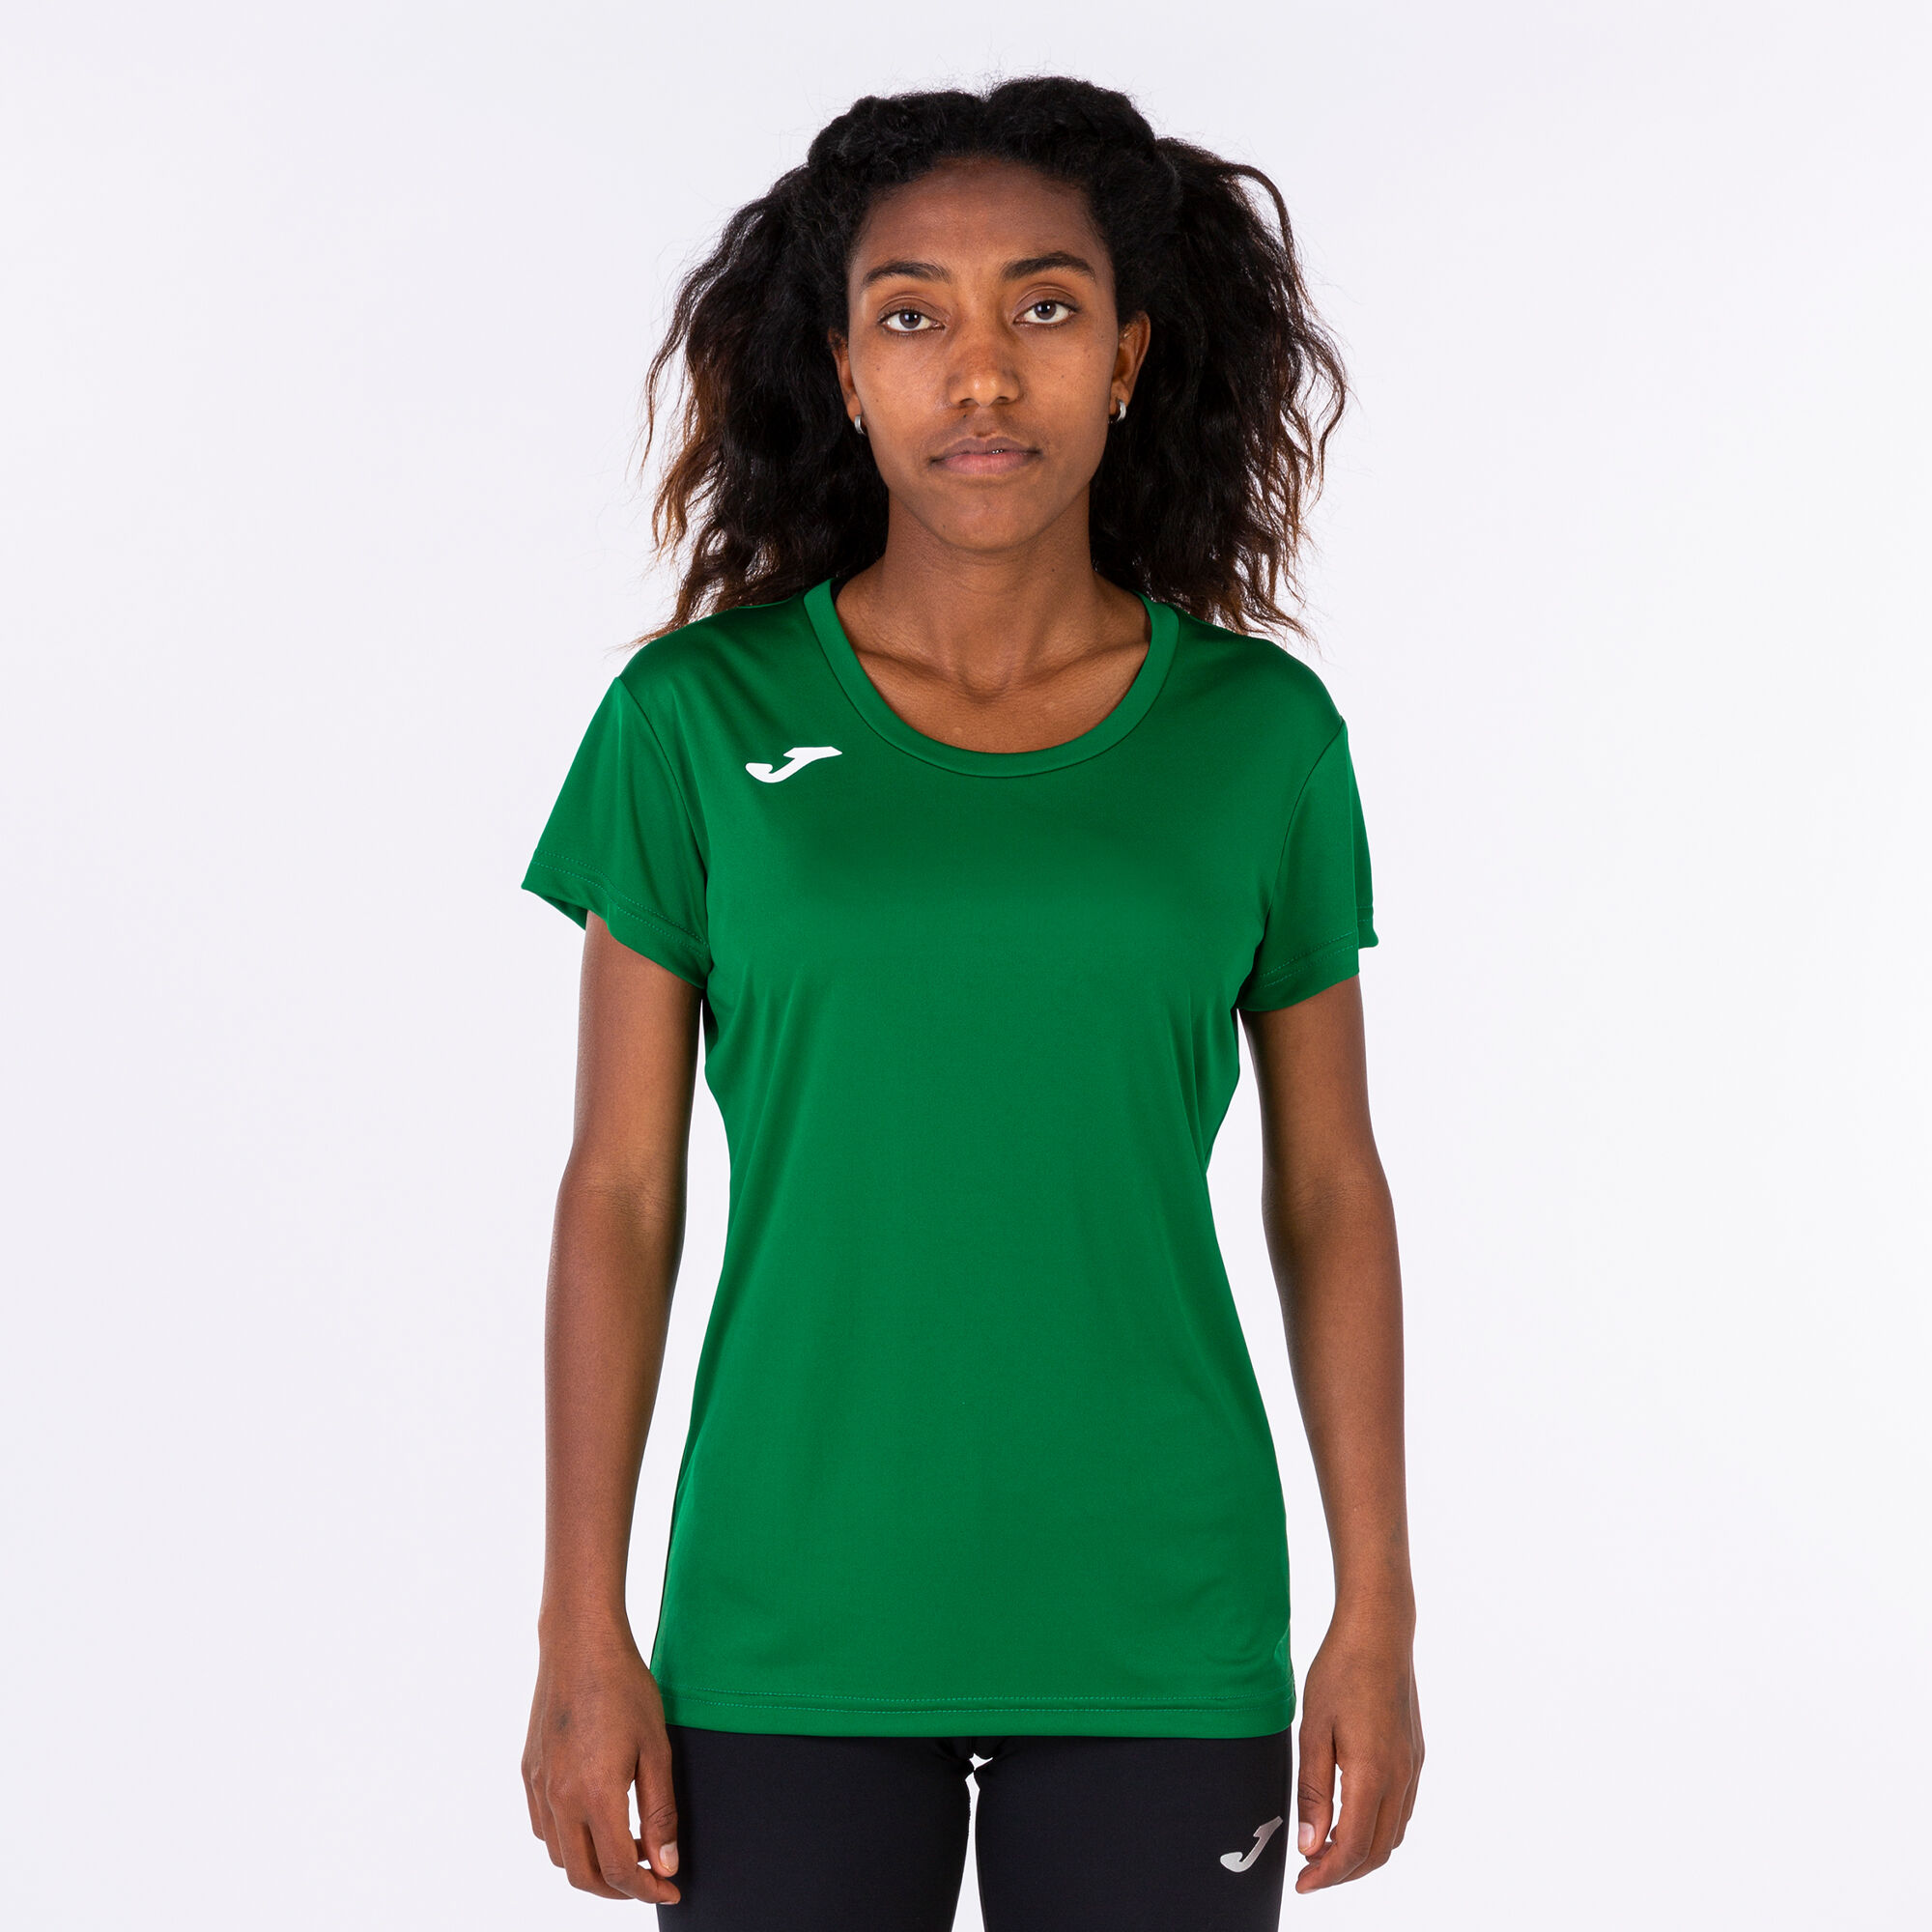 Maillot manches courtes femme Record II vert